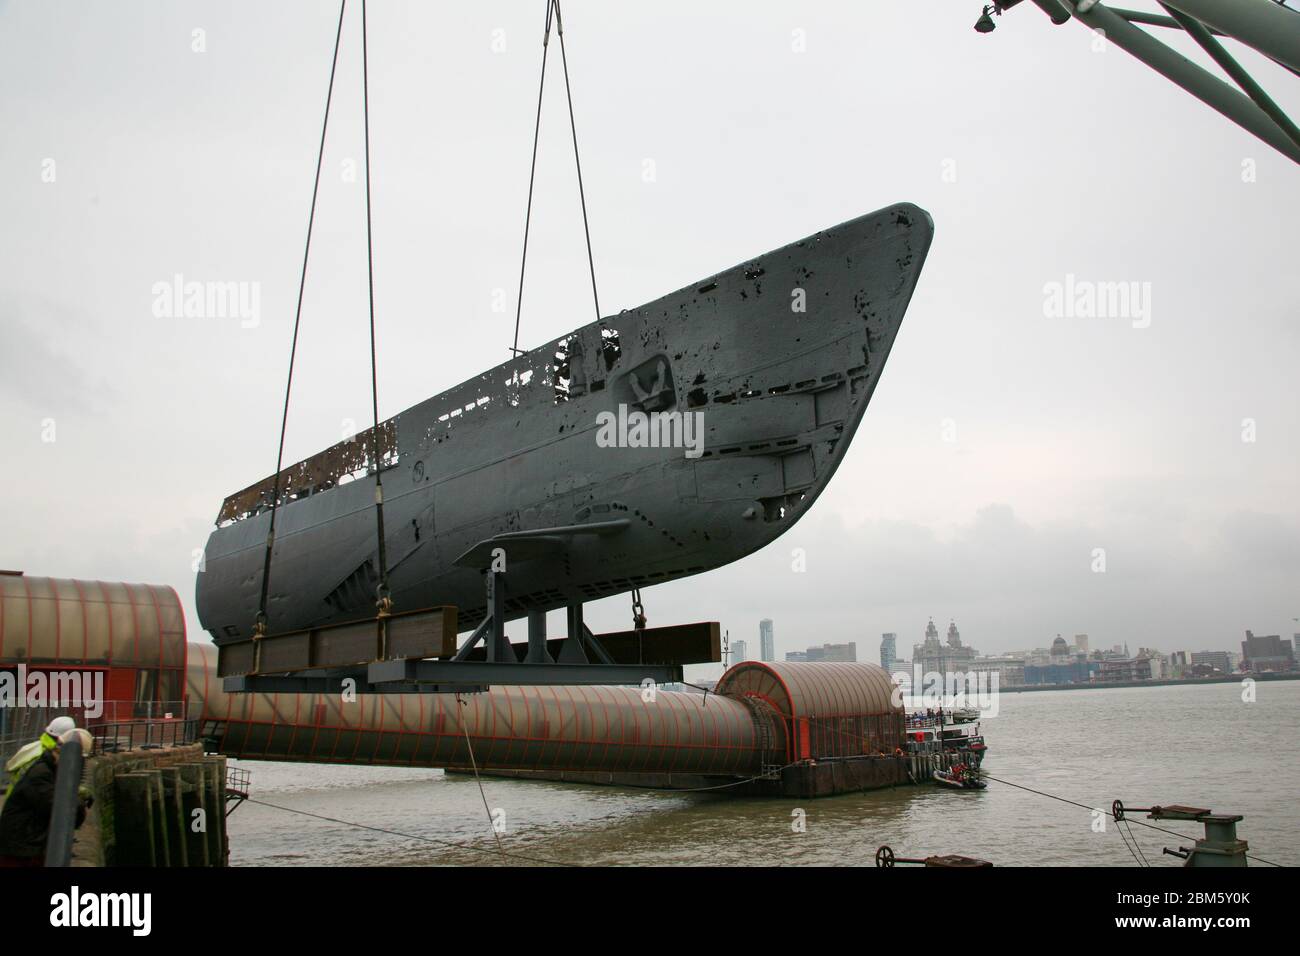 FILE: 7th May 2020. Photo taken: Seacombe, United Kingdom15th March 2008 Bow Section and Central Section of U 534 having been brought ashore at the Woodside Ferry Terminal Credit: Photographing North/Alamy Live News Stock Photo